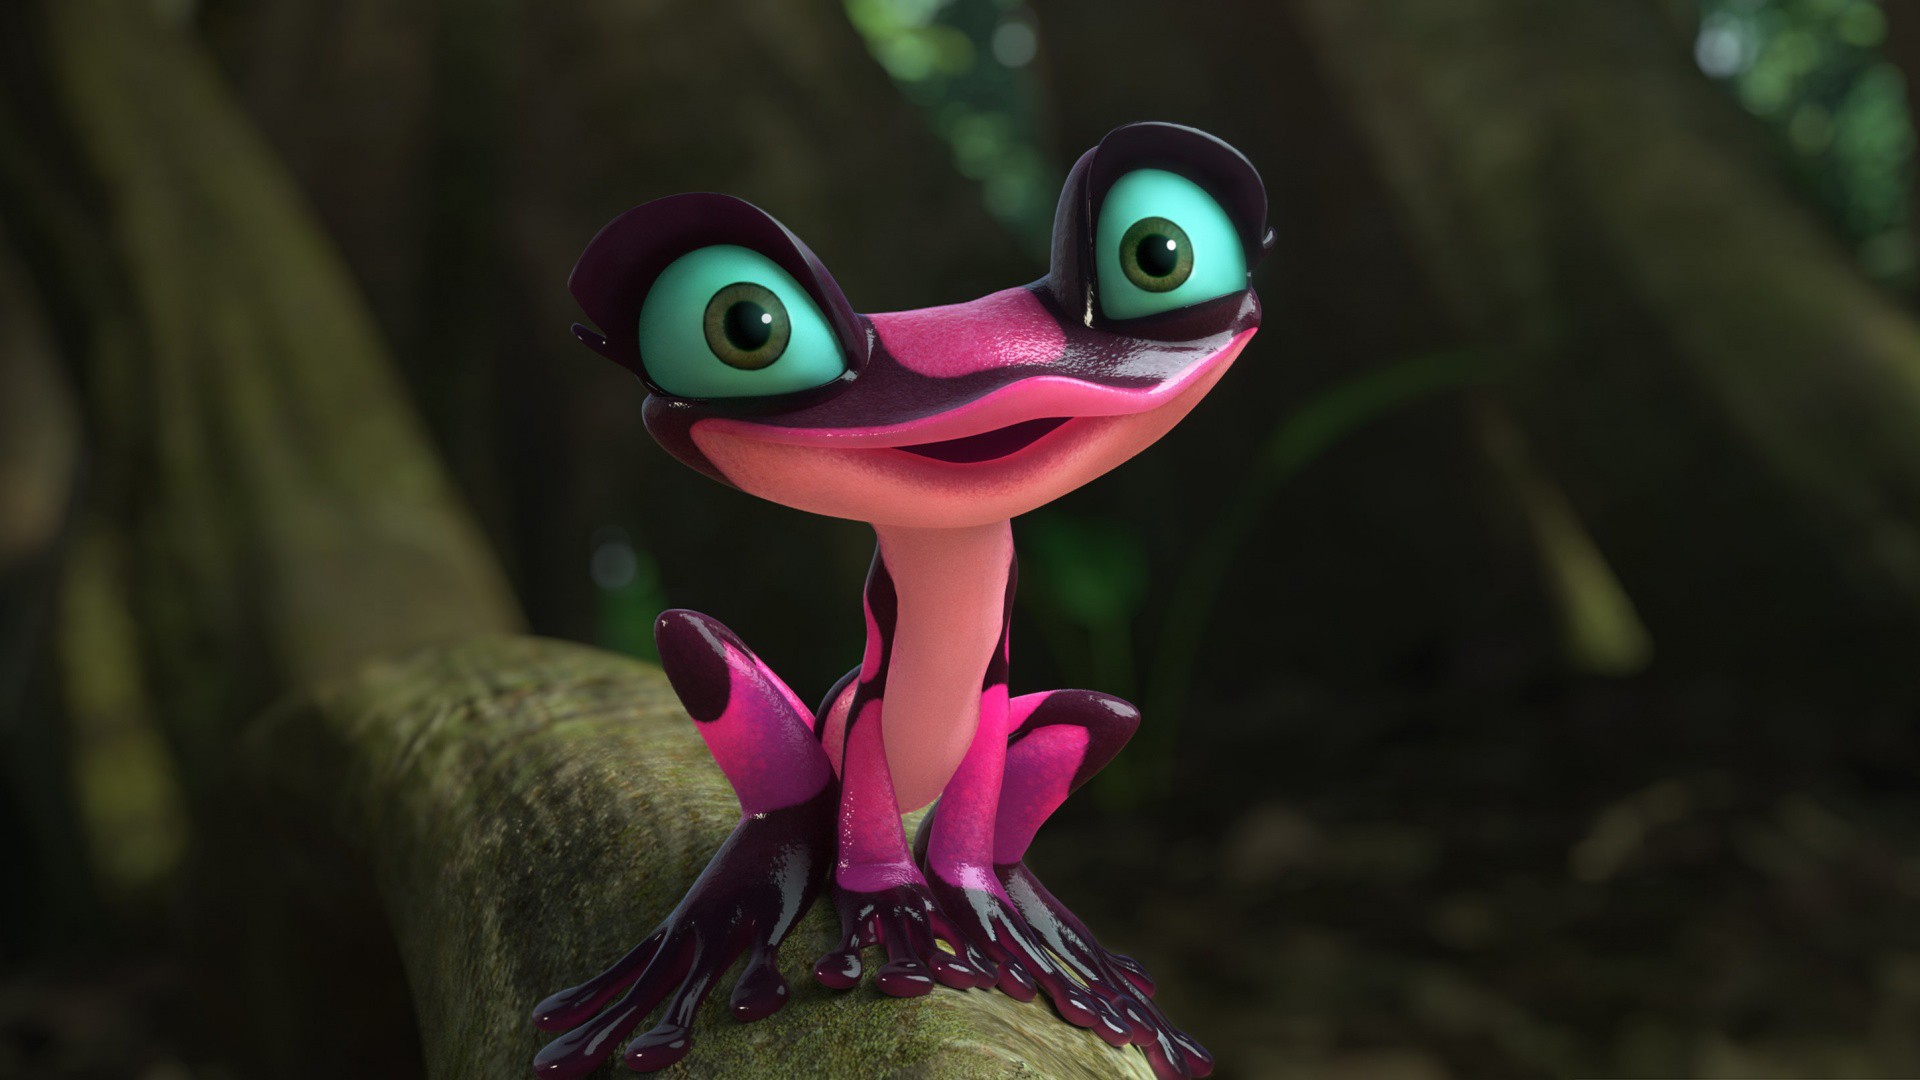 Cute frog cartoon wallpapers and images   wallpapers pictures photos 1920x1080